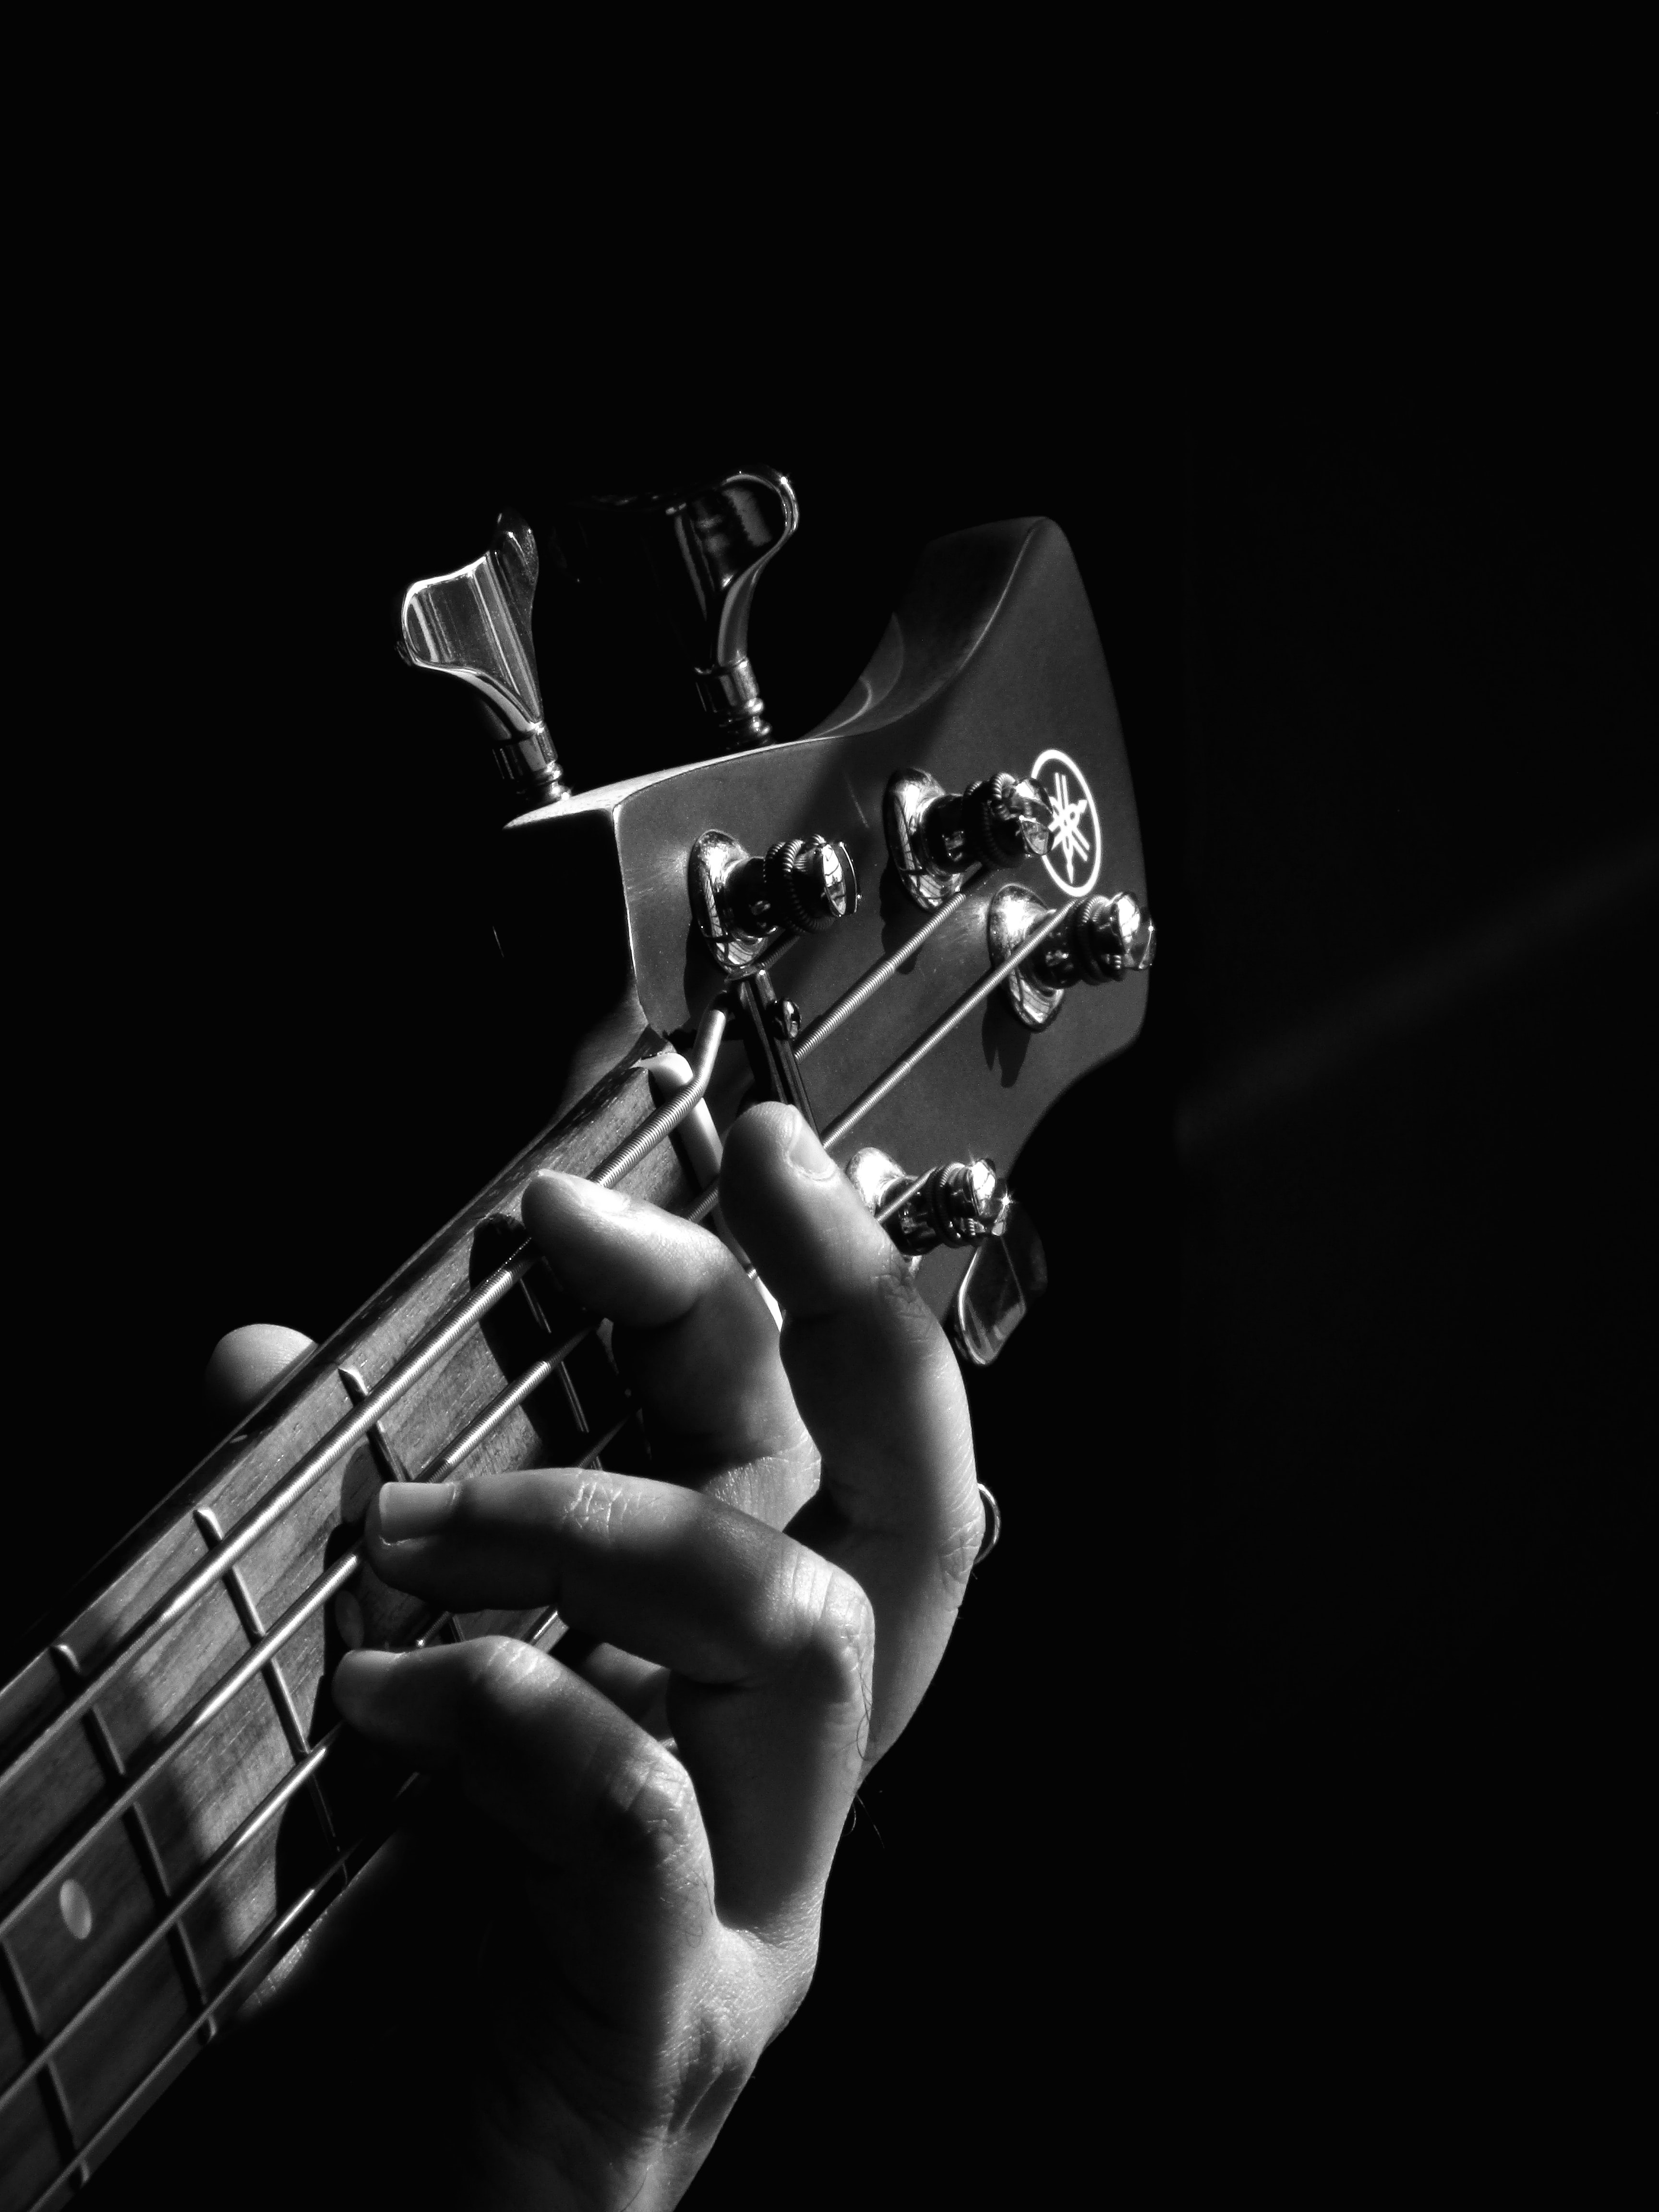 chb, musical instrument, guitar, hand, vulture, bw, music cell phone wallpapers